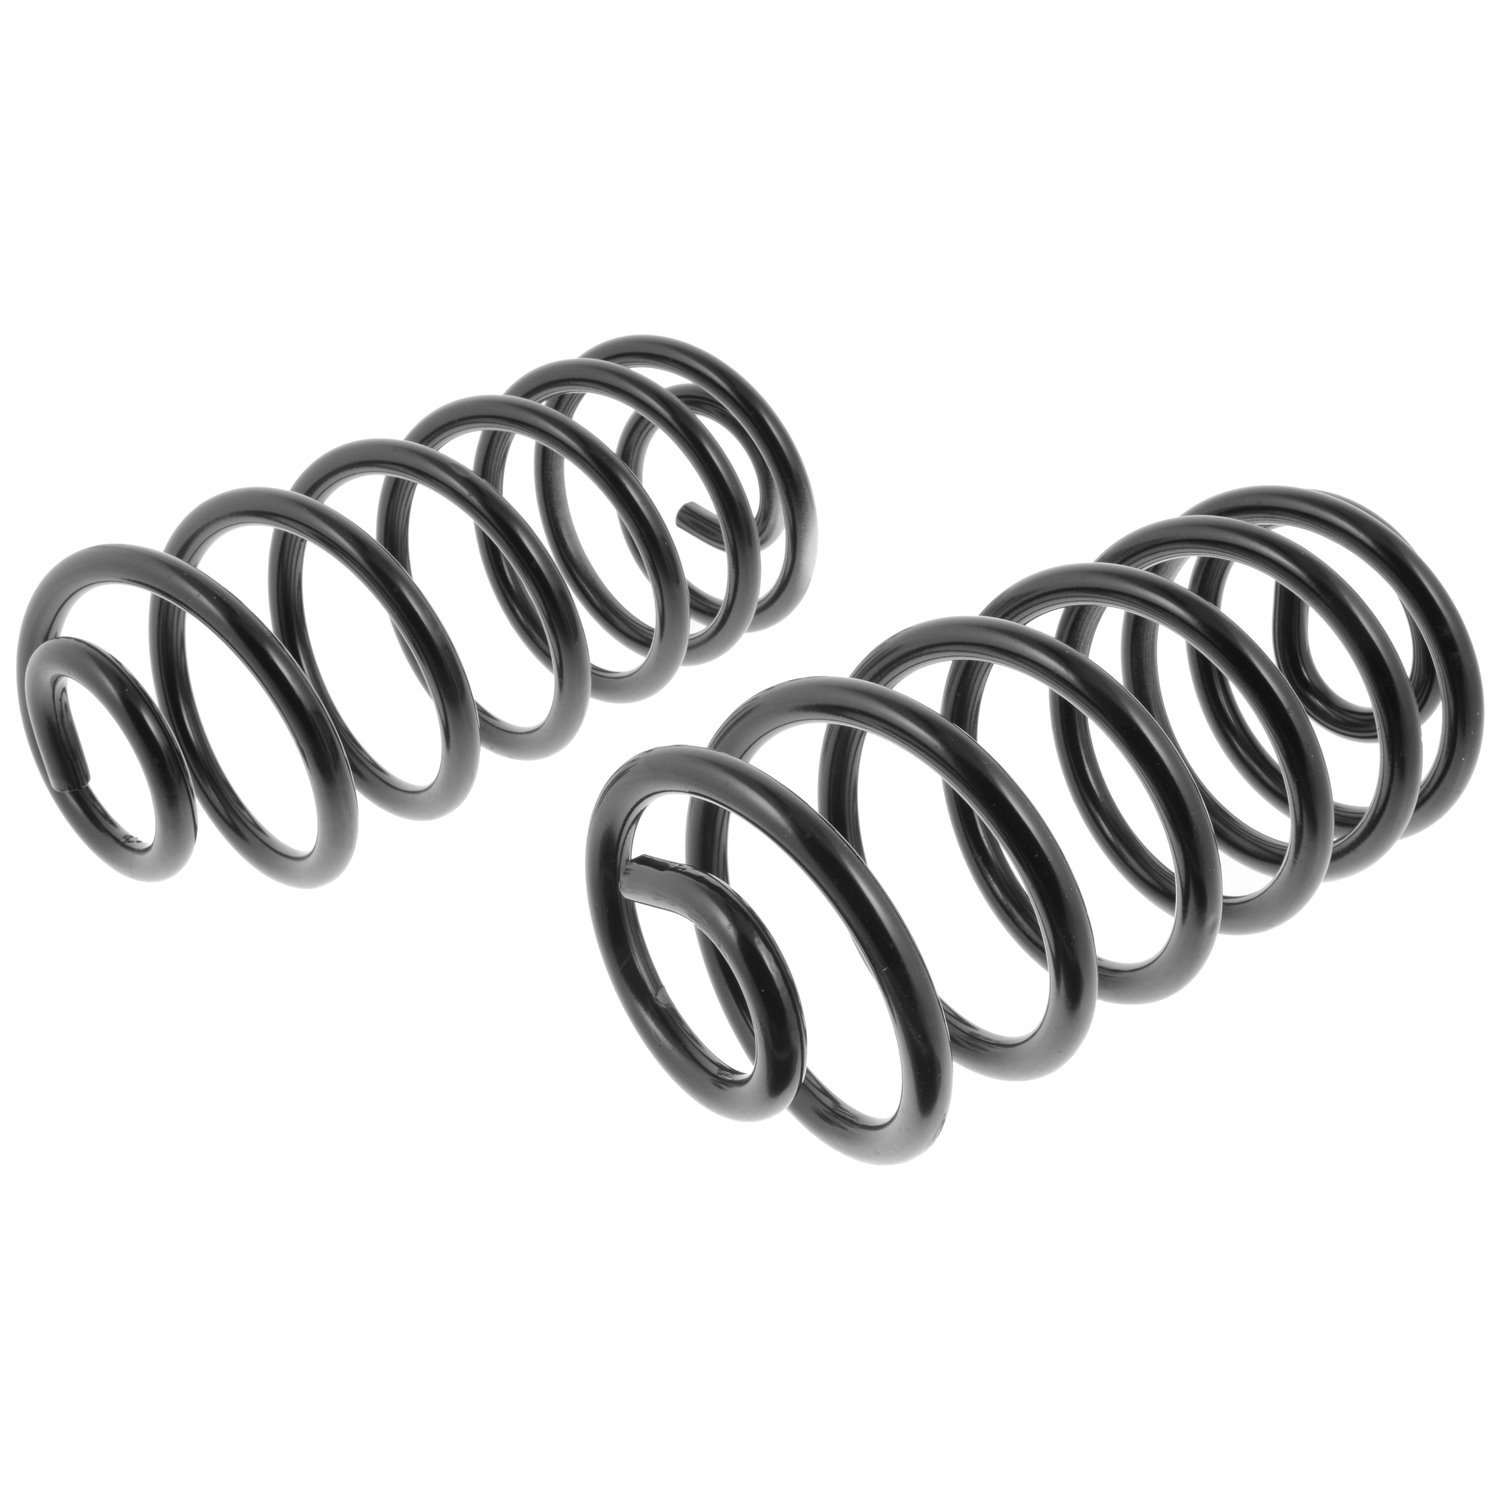 JCS1795T Coil Spring Set Fits Select Chevrolet Models, Variable-Rate, Position: Left/Driver or Right/Passenger